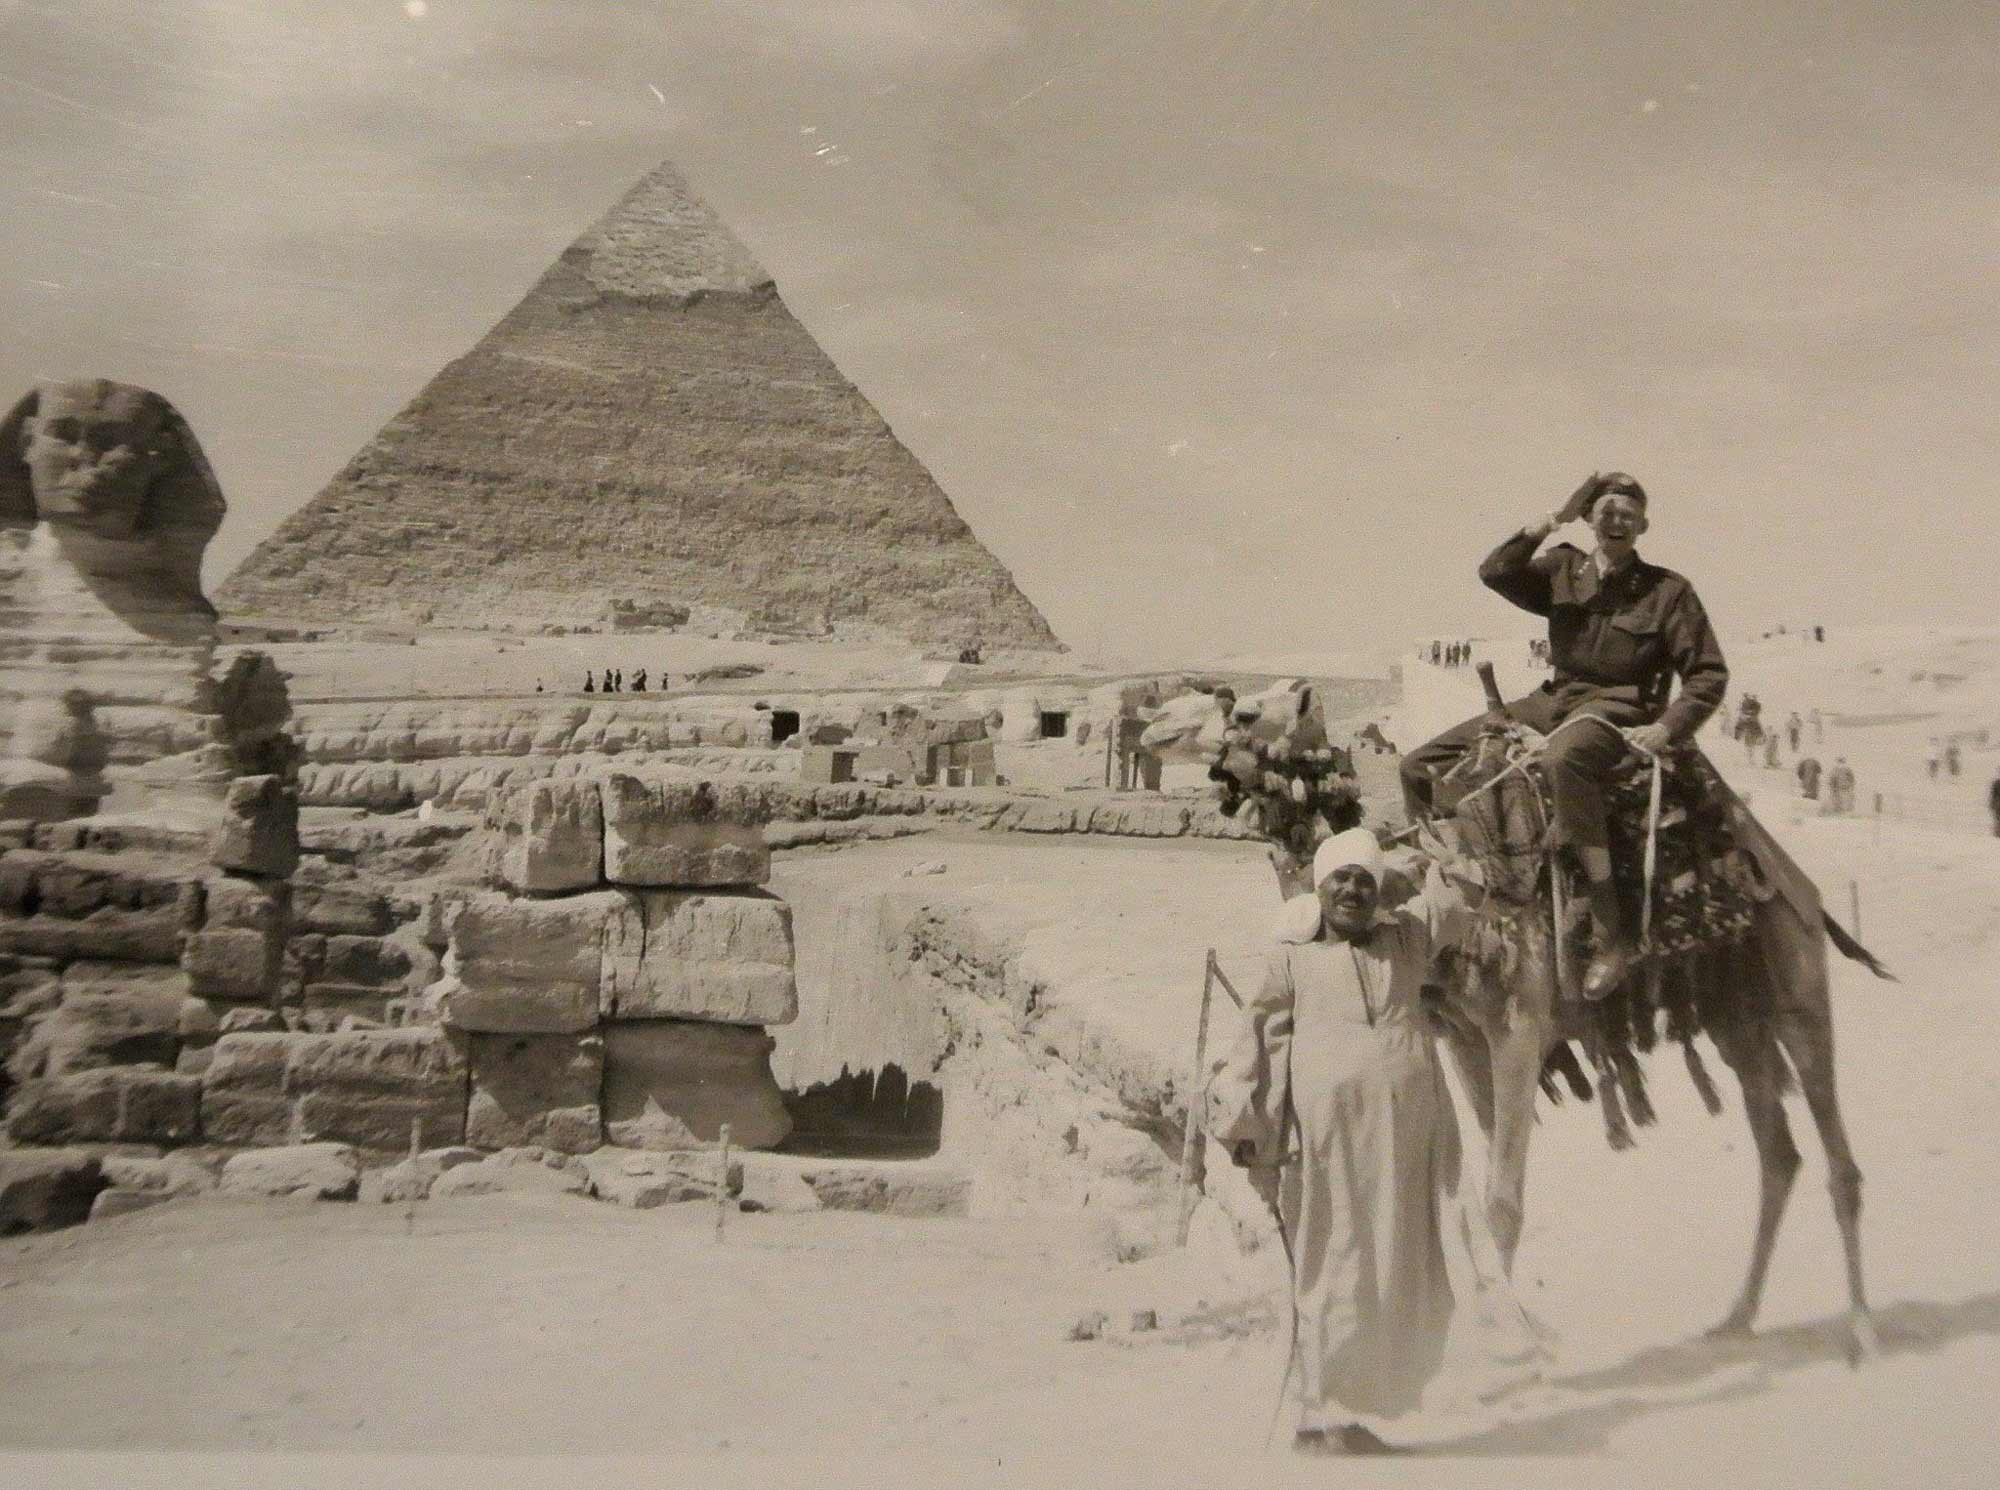 Dr. Hans Riddervold aboard a camel near the Sphinx at the Great Pyramid of Giza